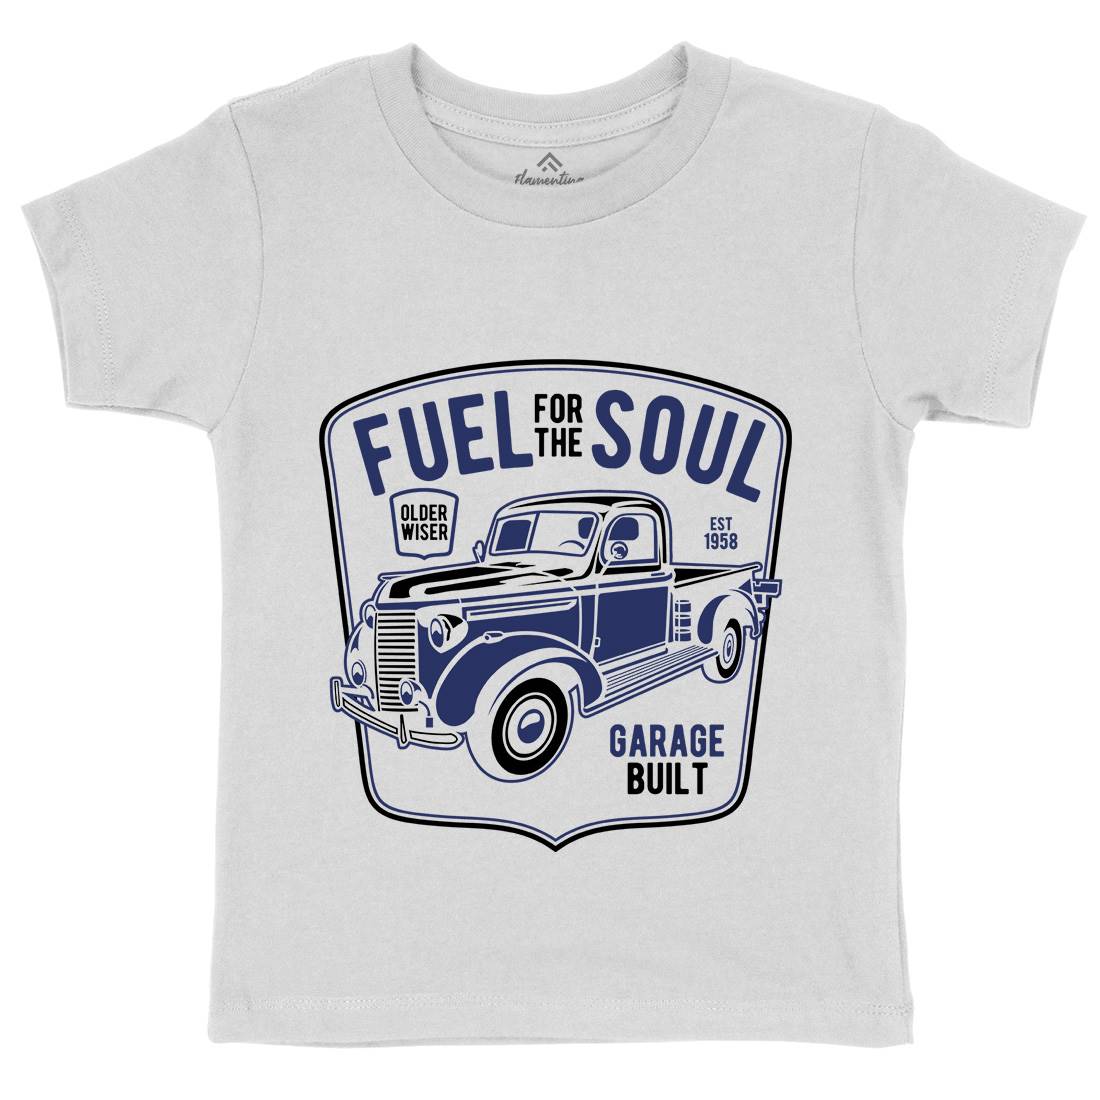 Fuel For The Soul Kids Organic Crew Neck T-Shirt Cars B213